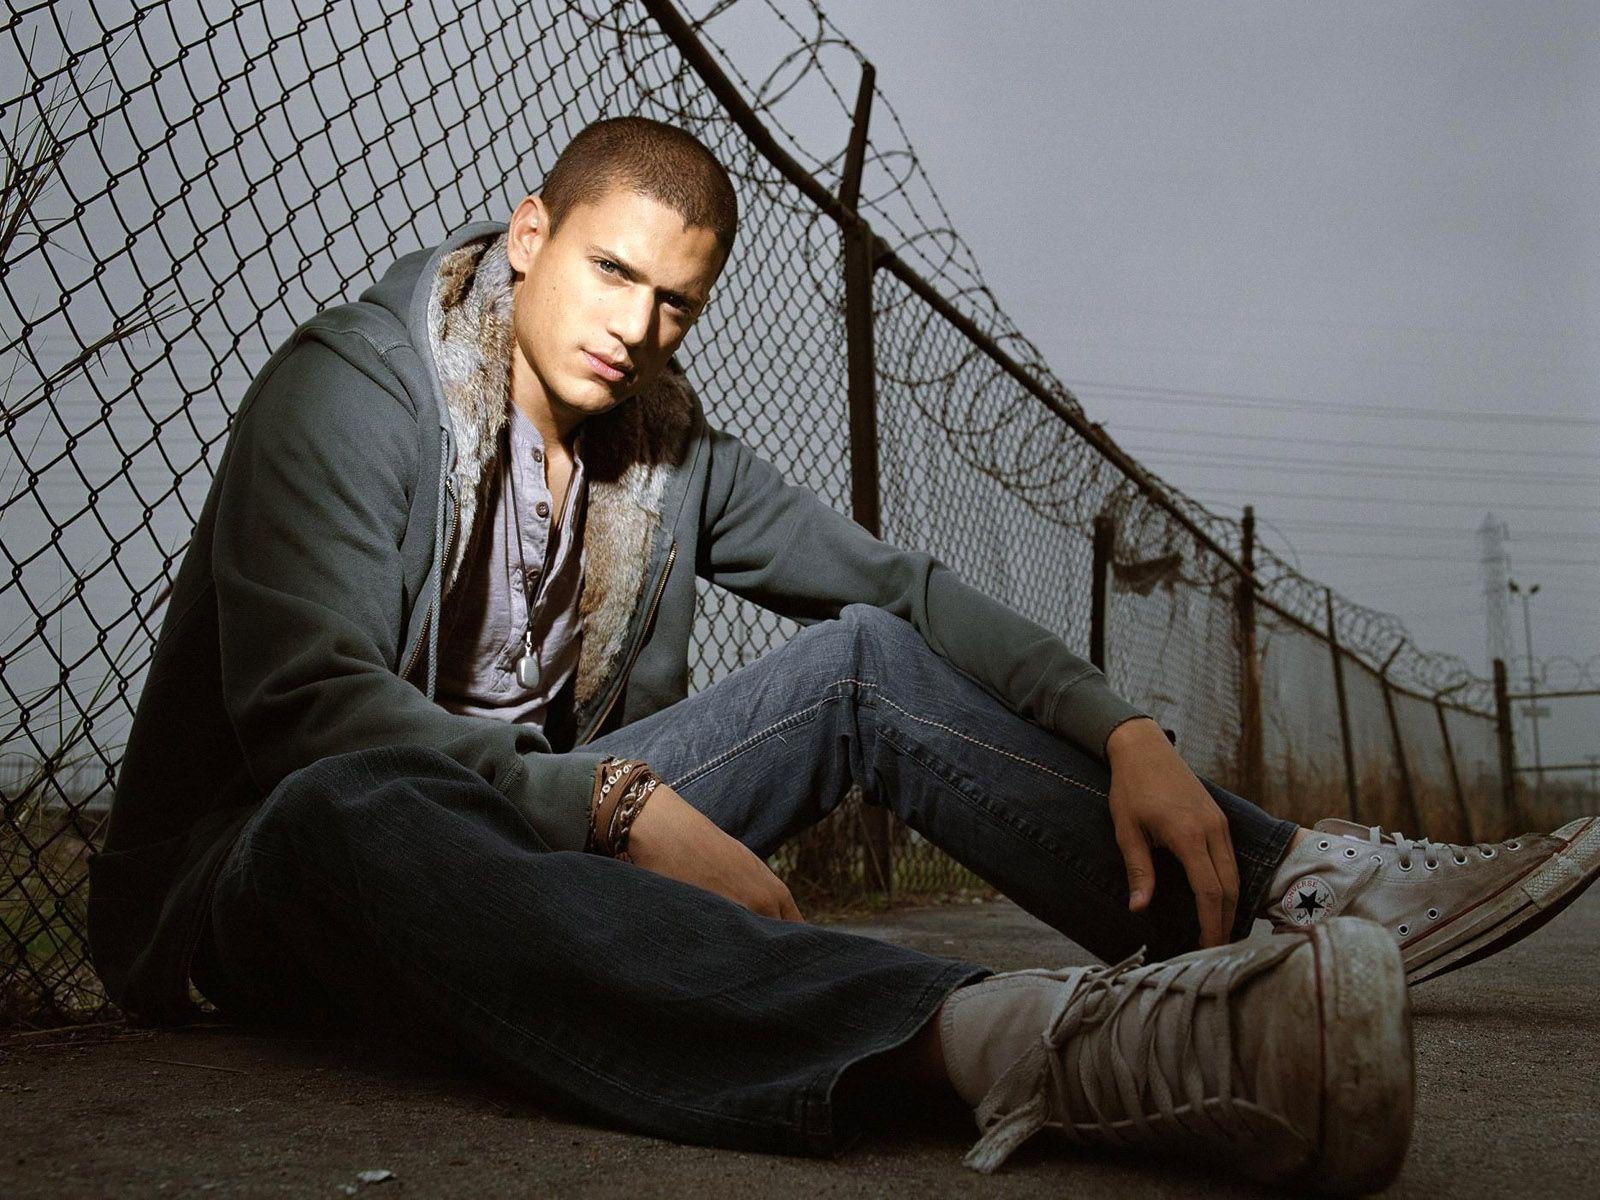 Prison Break. Movies & TV Shows I Have To Get